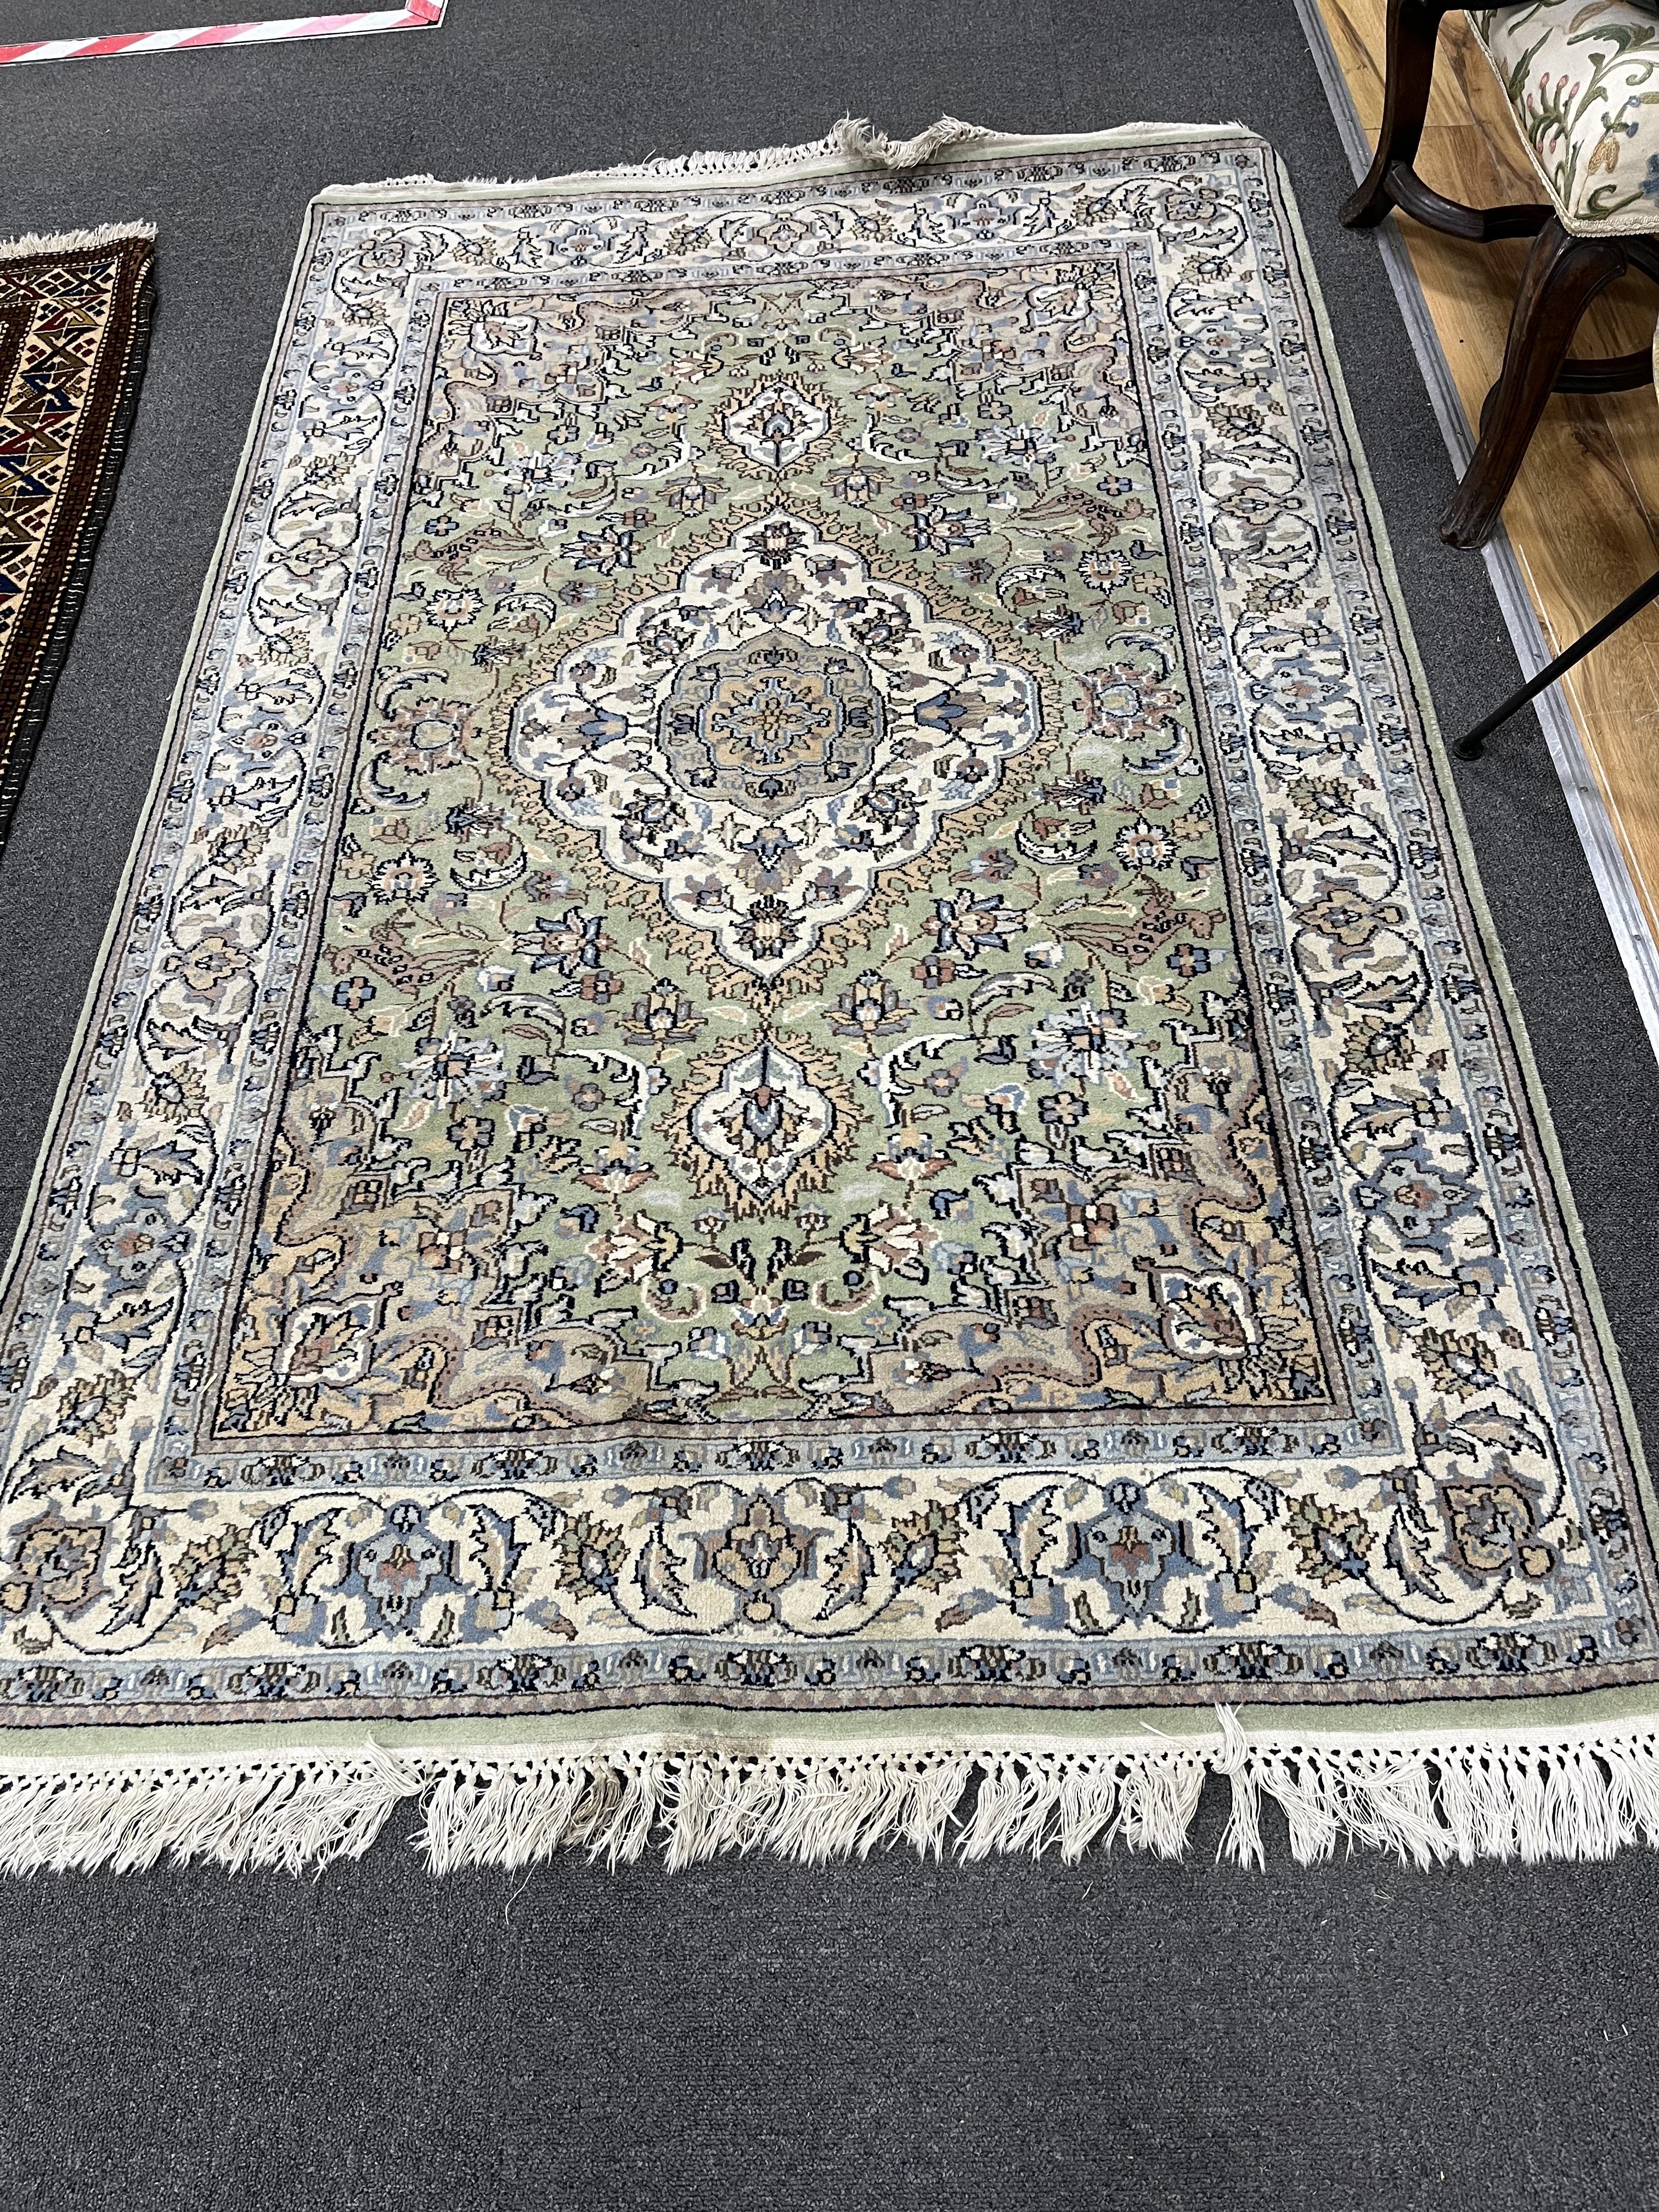 A North West Persian pale green ground rug, 180 x 120cm